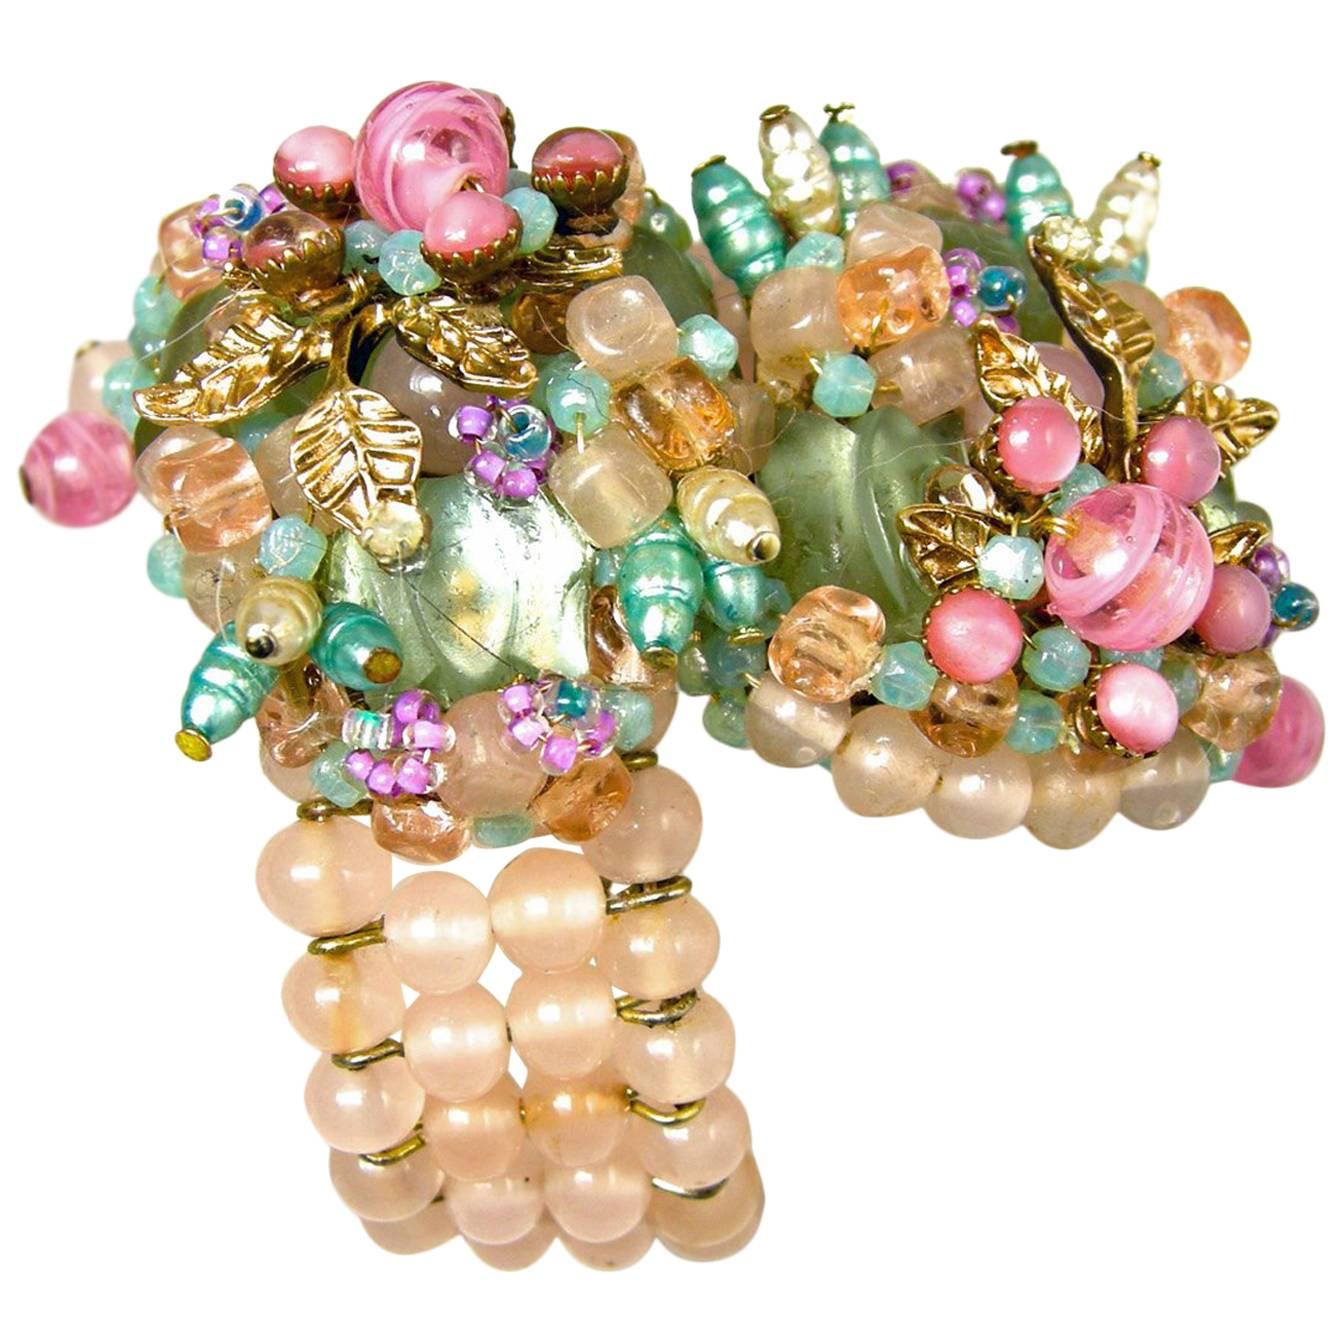 Vintage Rare Early Miriam Haskell Pink Pastel Glass Floral Wrap Bracelet For Sale